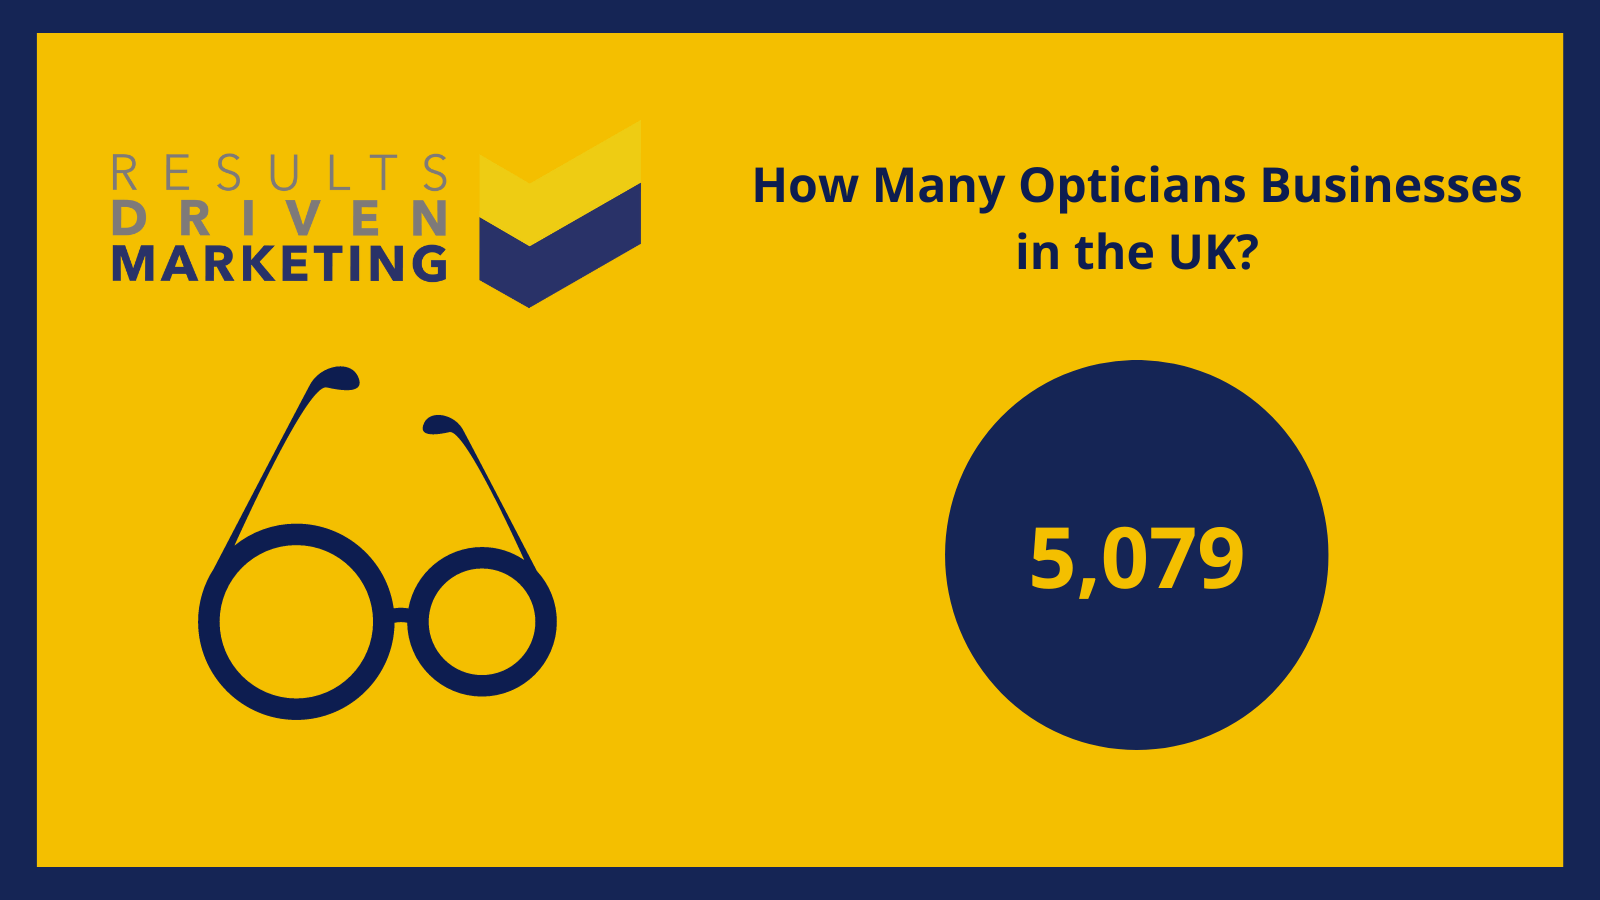 How Many Opticians Businesses in the UK?